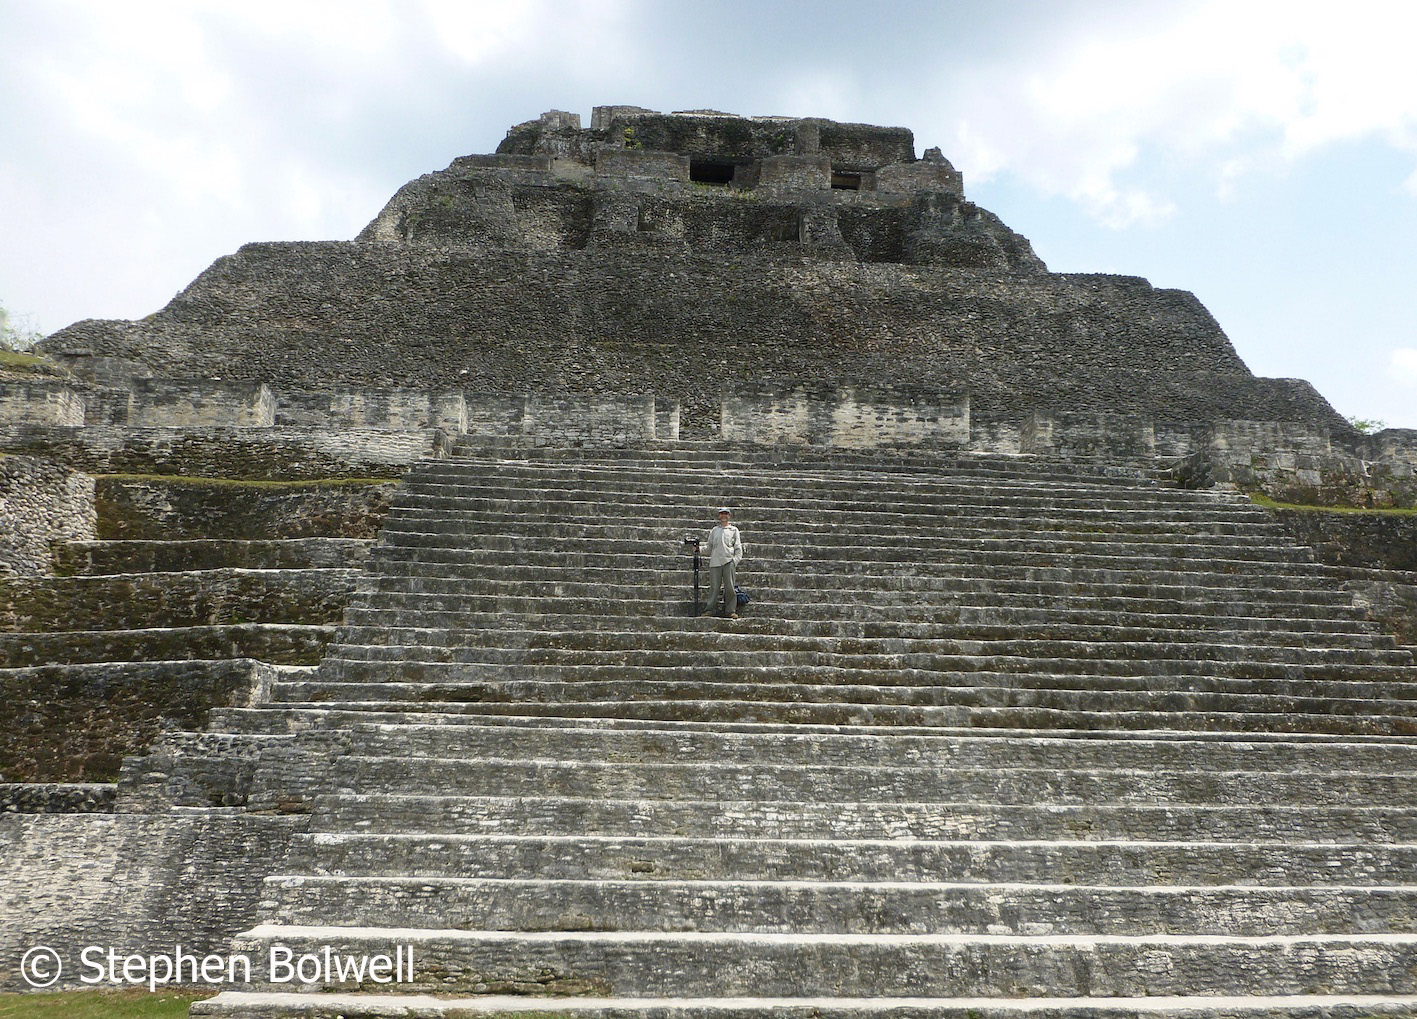 Standing on the steps of pyramid El Castillo - the most prominent structure here - looking down onto the square below.